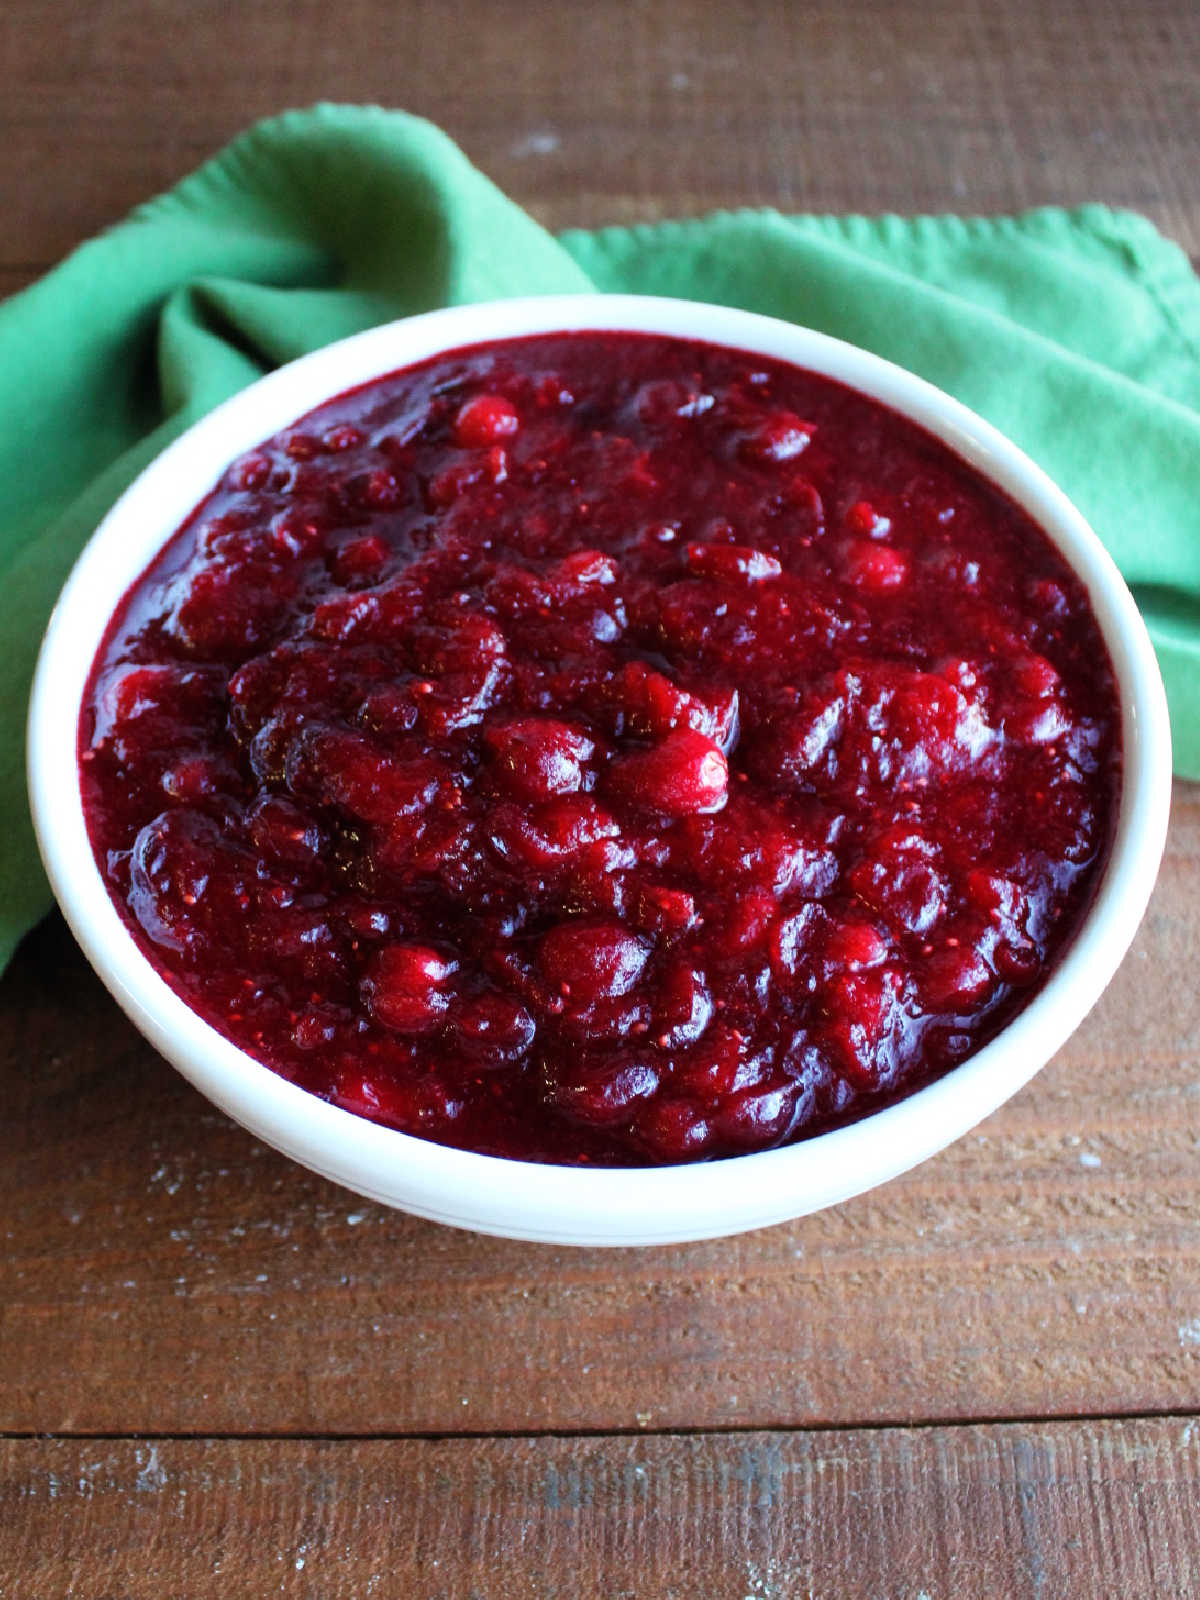 White serving bowl filled with chunky homemade cranberry sauce, ready to be served.